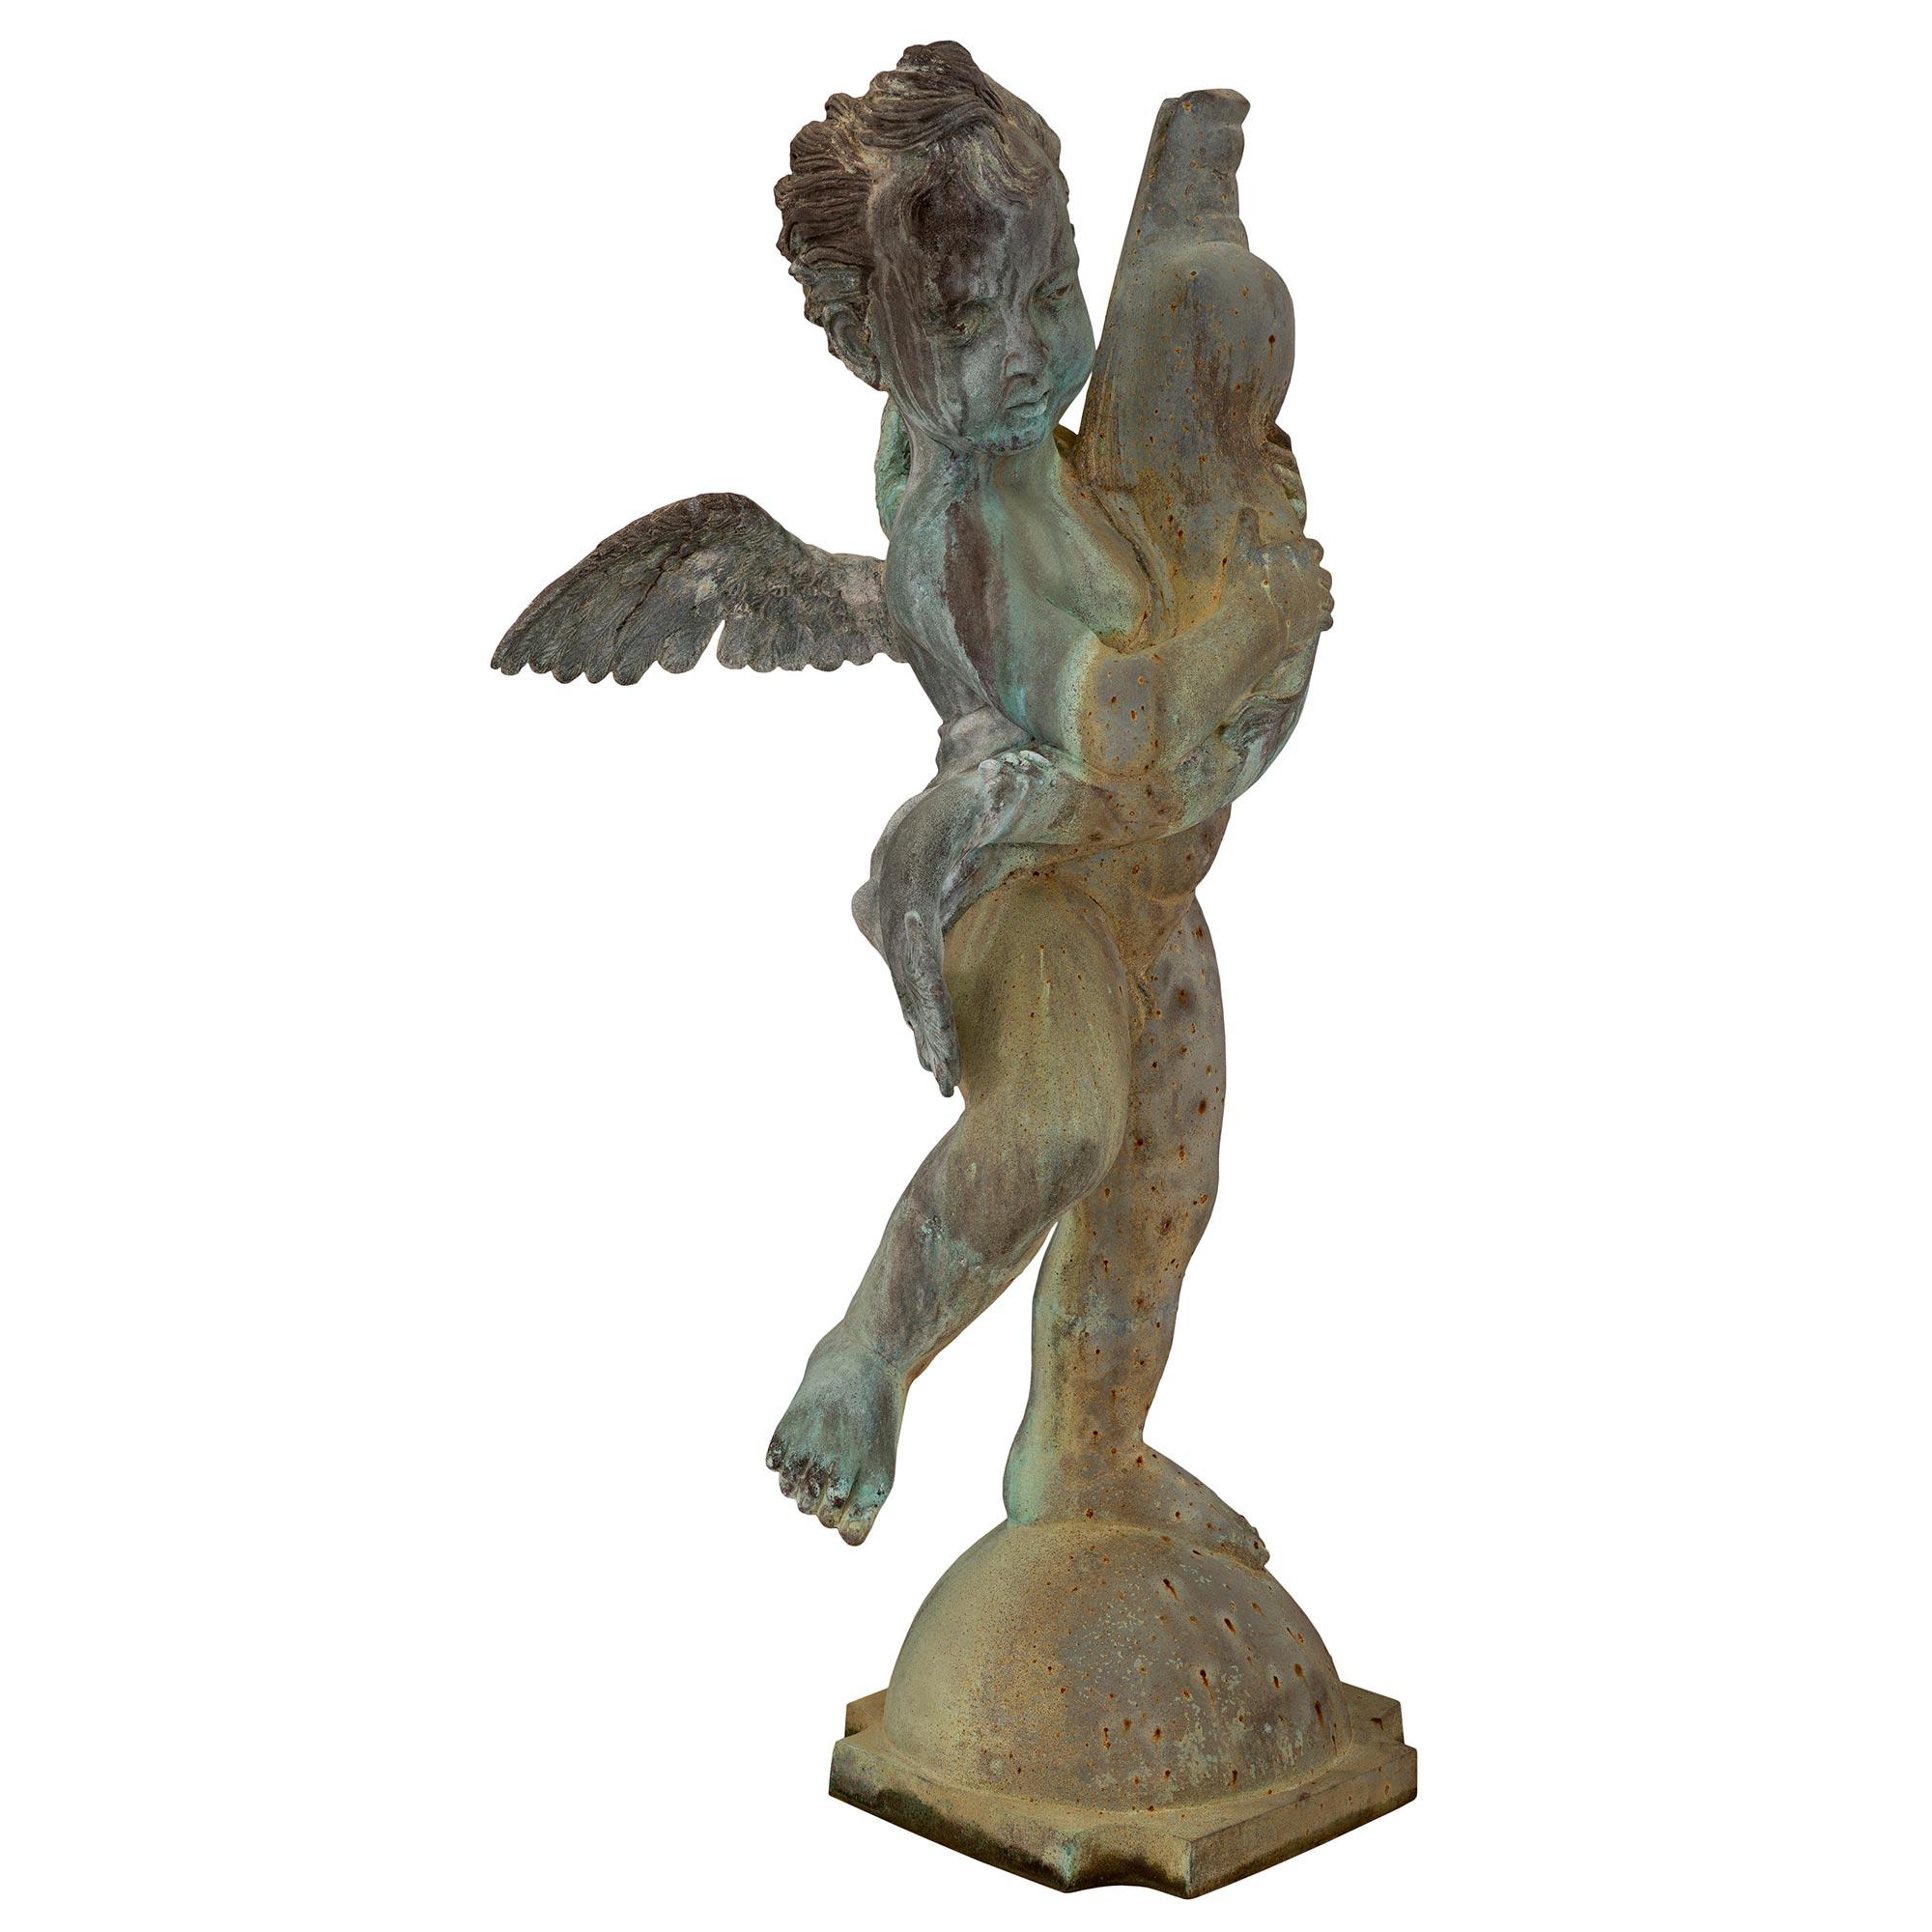 A beautiful and extremely charming French 19th century cast iron fountain of a young boy holding a dolphin. The fountain is raised by a square base with concave corners and an elegant dome shaped support. The charming young boy displays finely